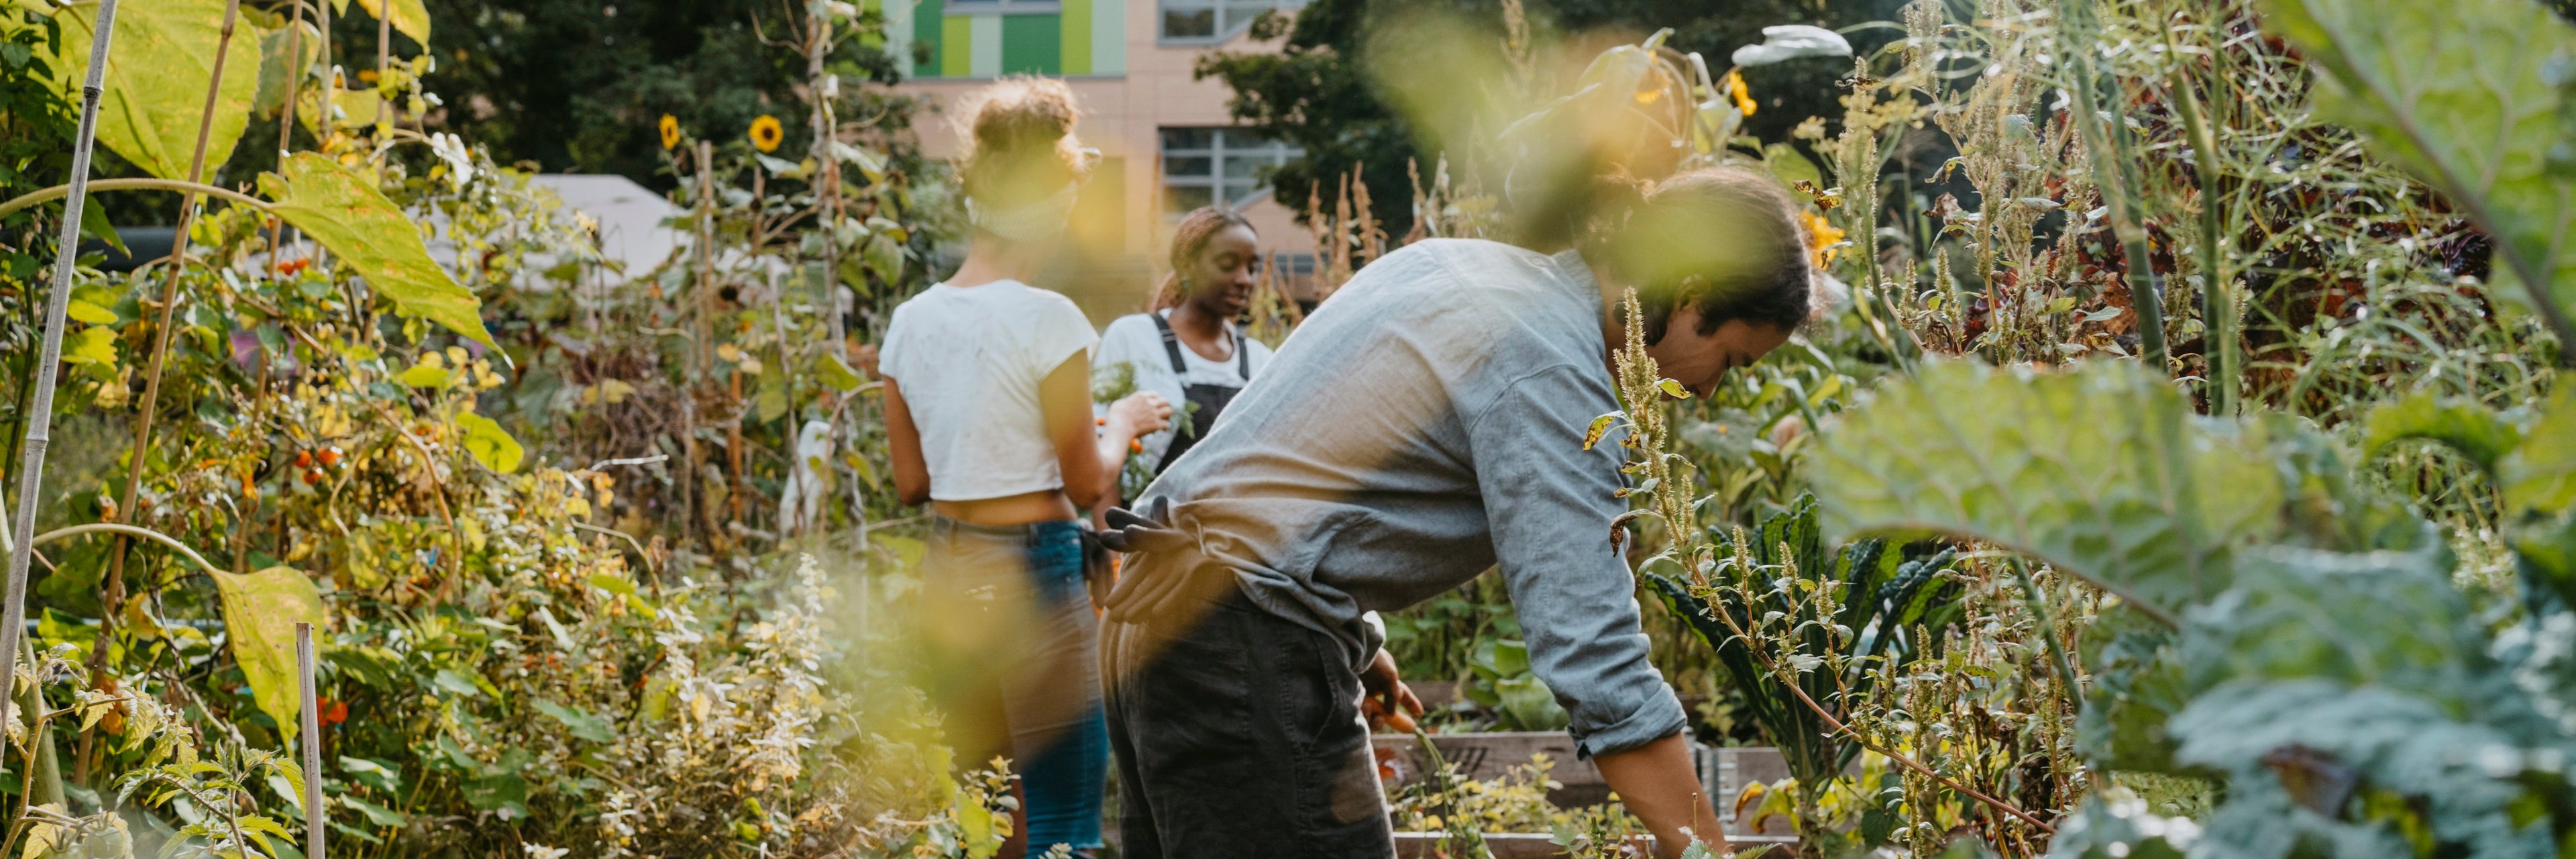 Group of people working on urban garden together.